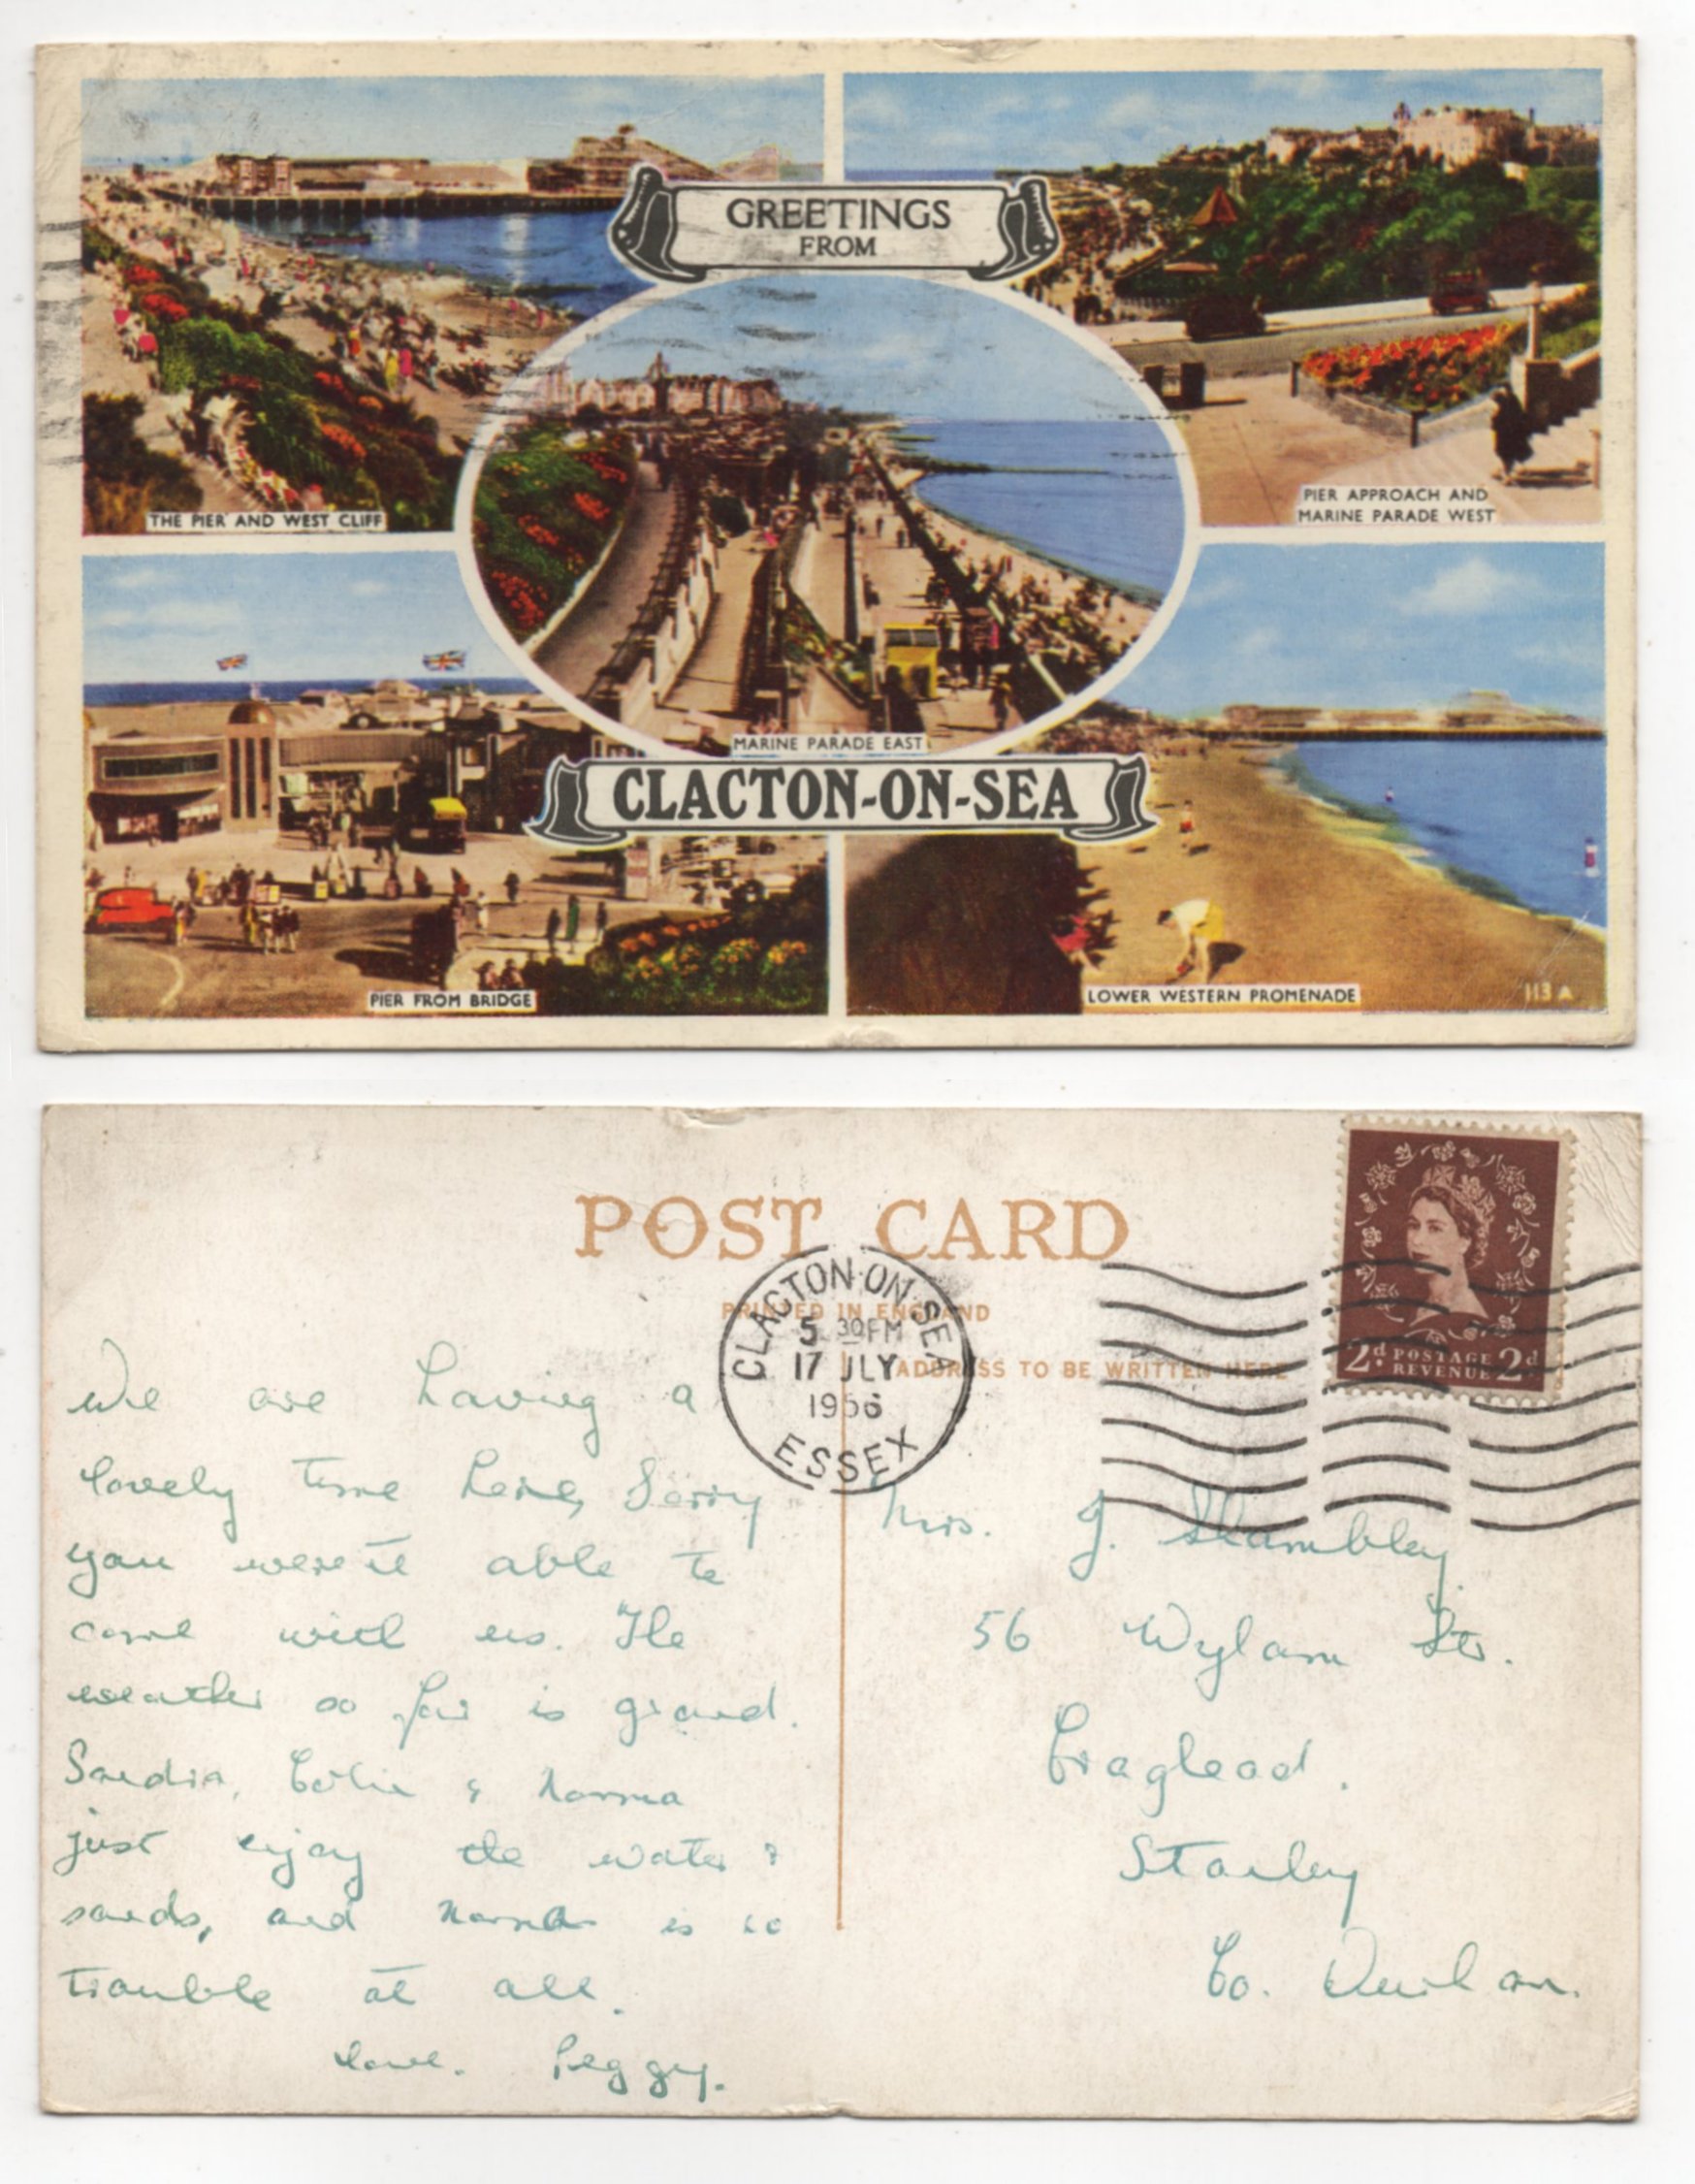 Greetings From Clacton-On-Sea JW035.jpg  by whitetaylor